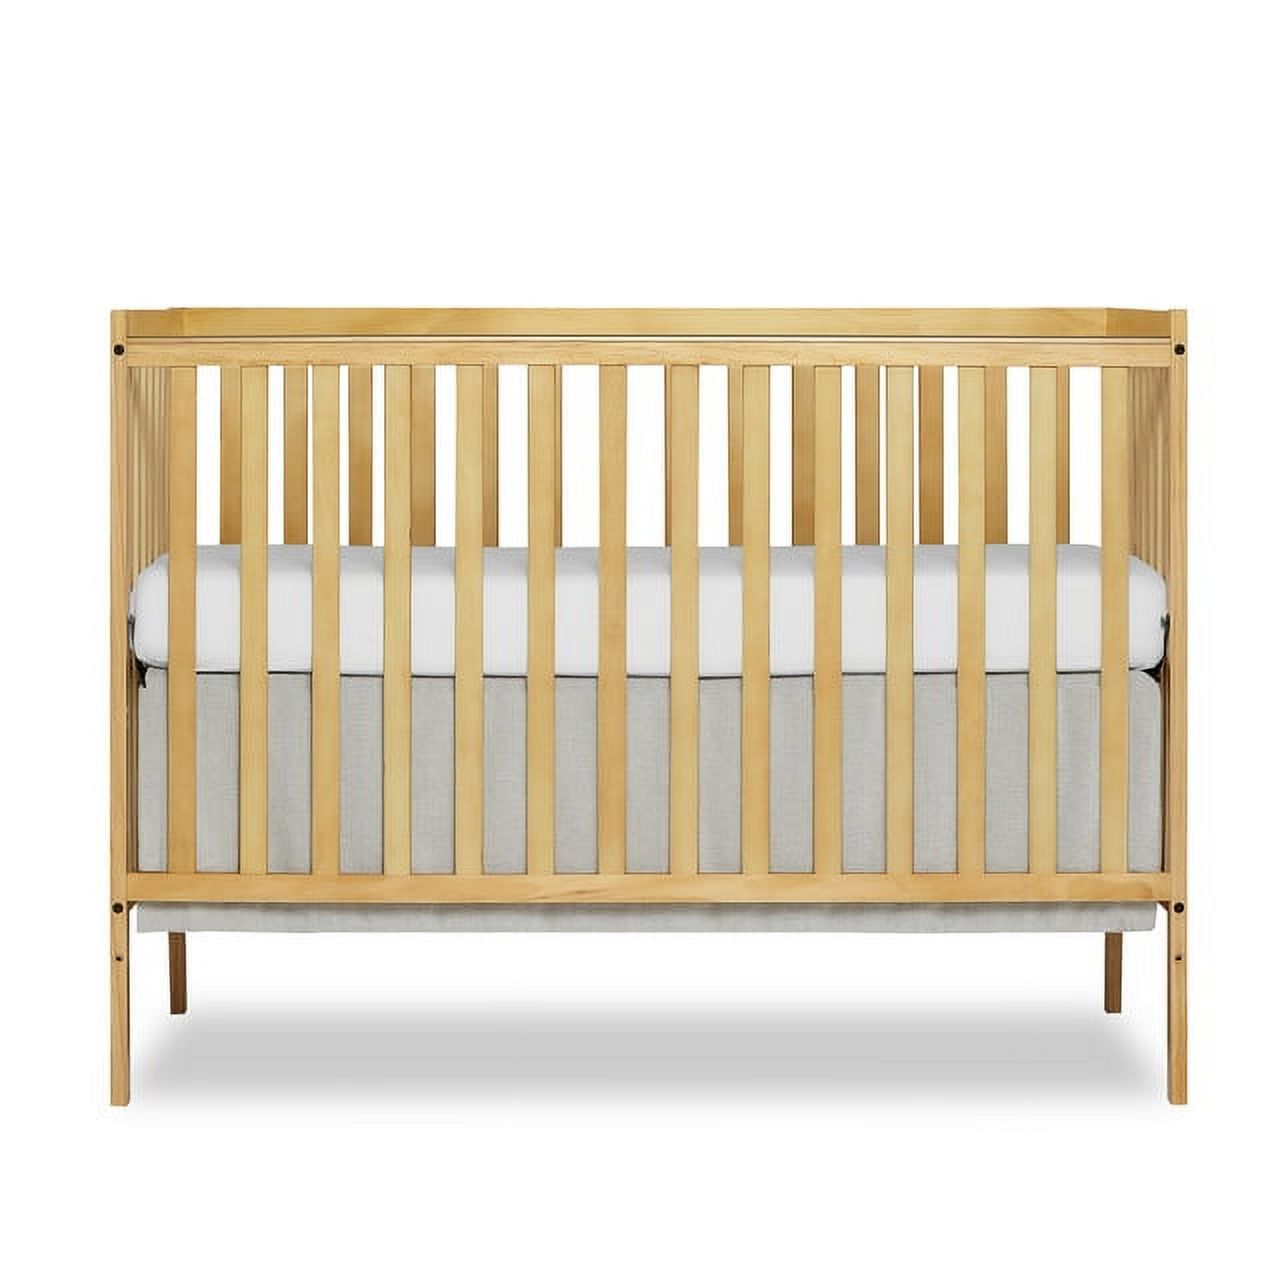 Sesslife 5-In-1 Convertible Crib, Baby Bed, Converts from Baby Crib to Toddler Bed, Fits Standard Full-Size Crib Mattress ,Easy to Assemble(Natural) - image 5 of 9